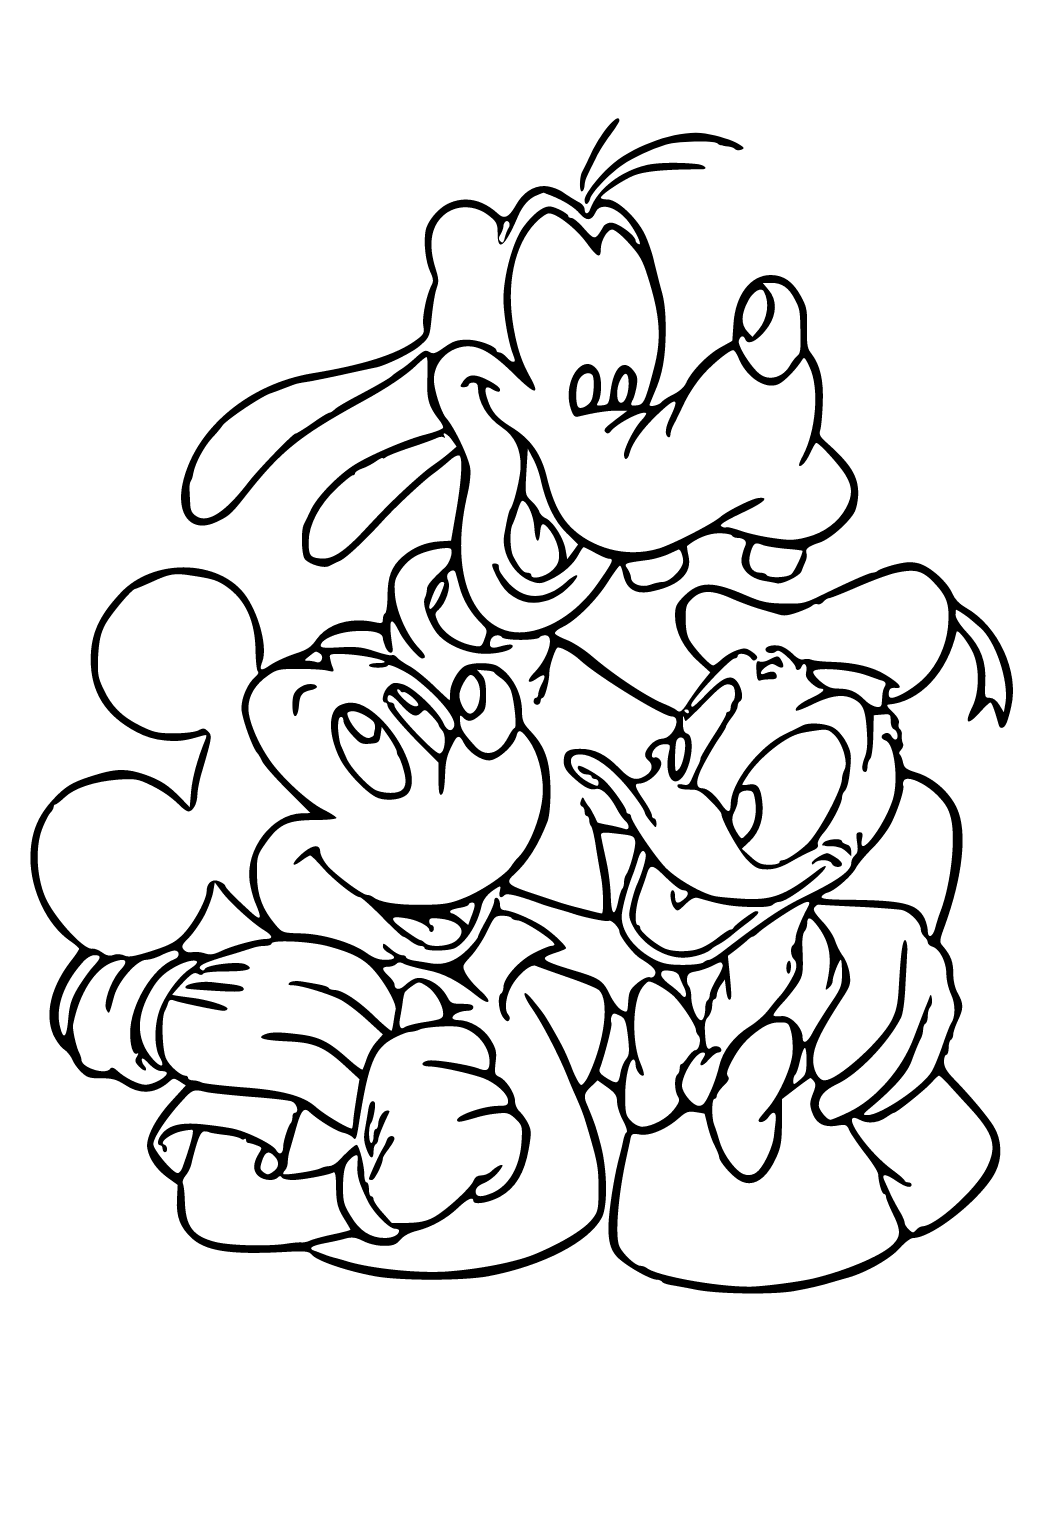 Mickey Mouse And His Friends Coloring Pages